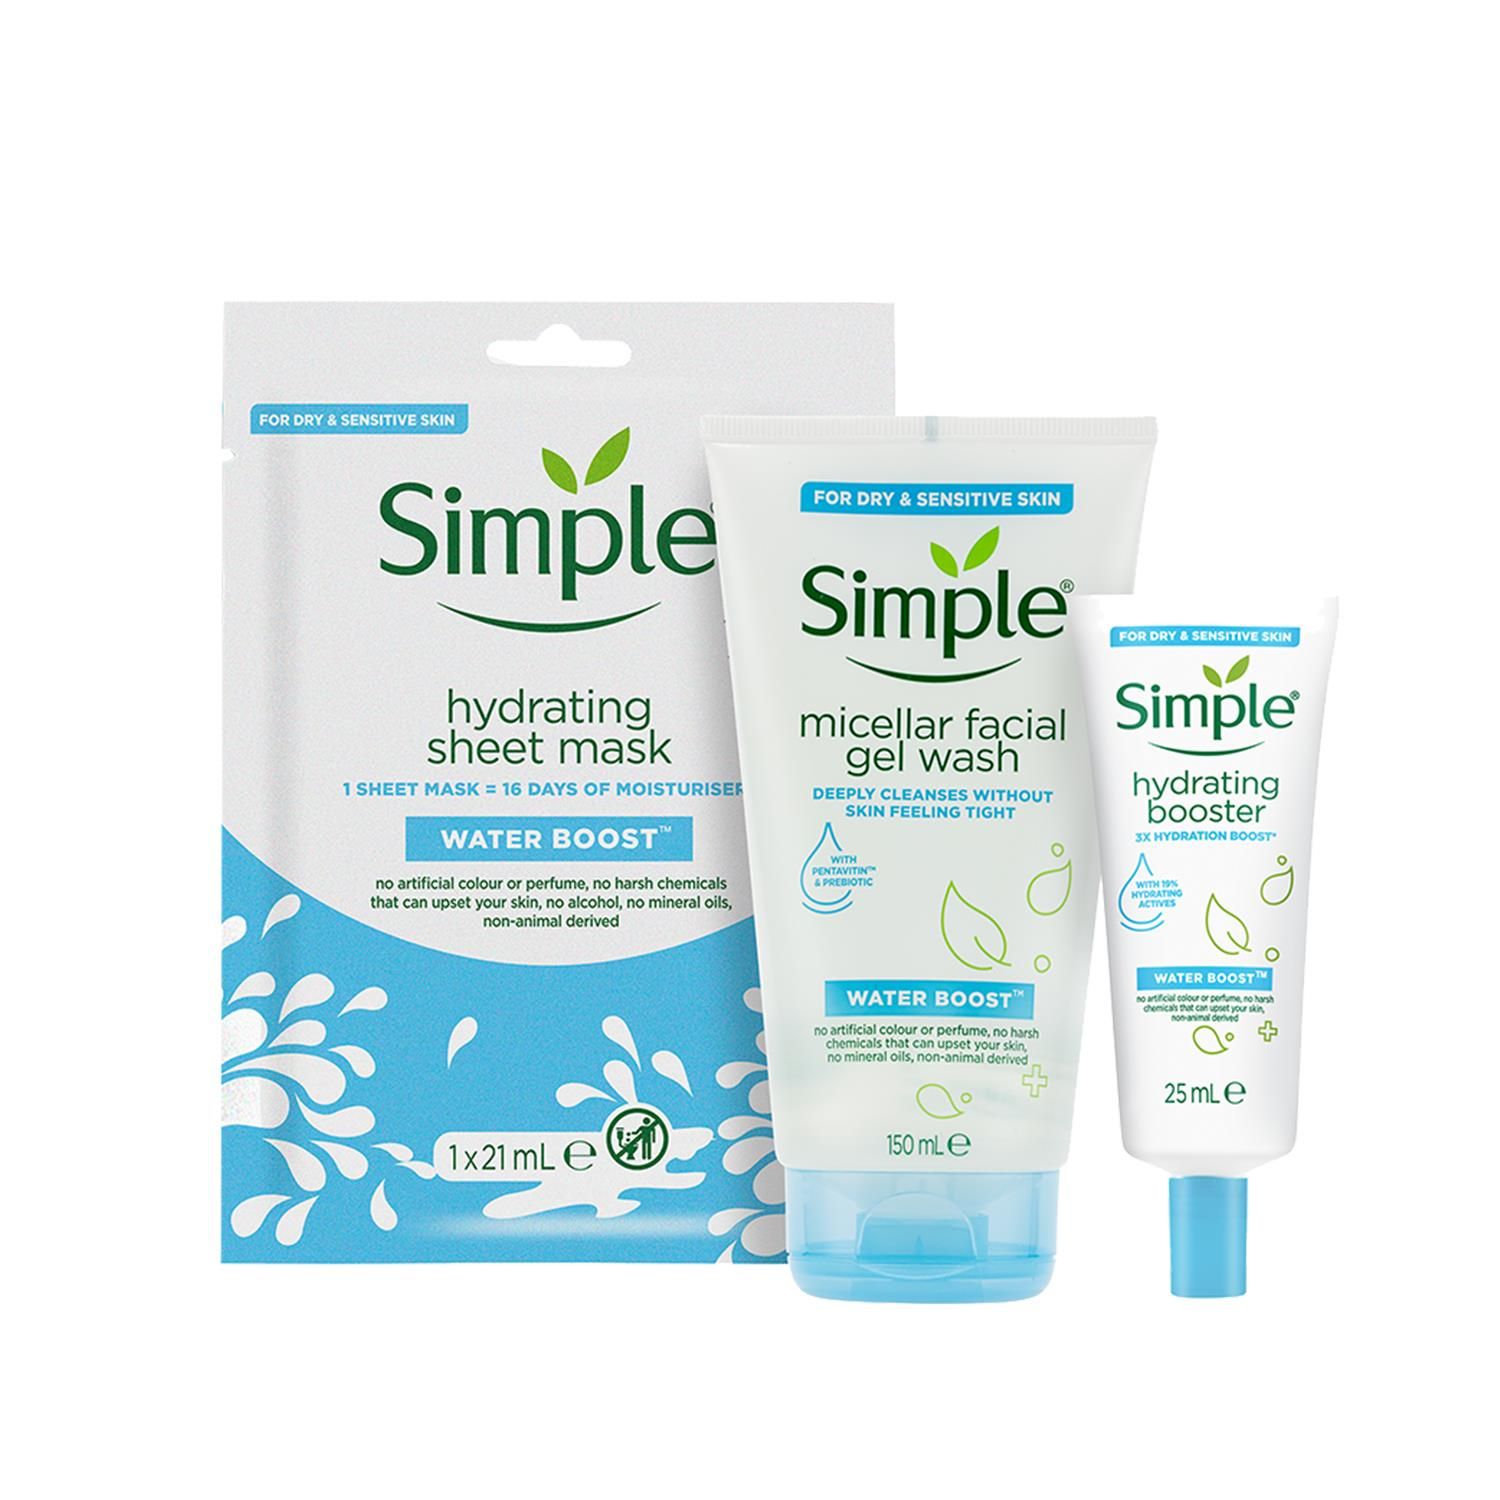 Who knew such a mighty boost in hydration could come from something so gentle and kind? Right from the get-go, the Simple philosophy has always been about being kind to even the most sensitive skin. Because all skin can be sensitive at times, we've put together this hydrating gift set with three Simple Water Boost products in a wonderful, Simple beauty bag - so even sensitive skin can be hydrated. 

Simple Water Boost Hydrating Booster is a water-based moisturiser rich in skin essential minerals and a plant extract that works as an invisible plaster to lock in moisture and provide long-lasting skin hydration. Their Water Boost Hydrating Gel Cream 50 ml completes this hydration regime trio. With its lightweight formulation, it leaves the skin feeling refreshed, supple, silky and smooth. 

Simple Water Boost Hydrating Sheet Mask helps to tackle the 5 early signs of dehydrated skin: dryness, dullness, dry dehydration lines, tightness, and roughness.
Simple Water Boost Micellar Facial Gel Wash with micellar cleansing technology to gently yet effectively cleanse your face, removing dirt and make-up. 

This Christmas give the gift of healthy-looking hydrated skin with this beauty bag gift set - the perfect gift for her.

Features:
Hydrating Sheet Mask for dry skin gives it 16 days' worth of moisturiser in just 15 minutes
Hydrating Booster has a lightweight formulation that instantly quenches thirsty, dry skin, making it look and feel healthy, supple, and soft
Simple Water Boost Micellar Facial Gel Wash instantly restores hydration to dehydrated skin, leaving it feeling refreshed, supple and comfortable

Safety Warnings: Avoid getting into your eyes. Avoid getting into your eyes.

Gift Set Includes:

1x Simple Hydrating Booster 25 ml
1x Simple Water Boost Hydrating Sheet Mask
1x Simple Water Boost Micellar Facial Gel Wash 150ml